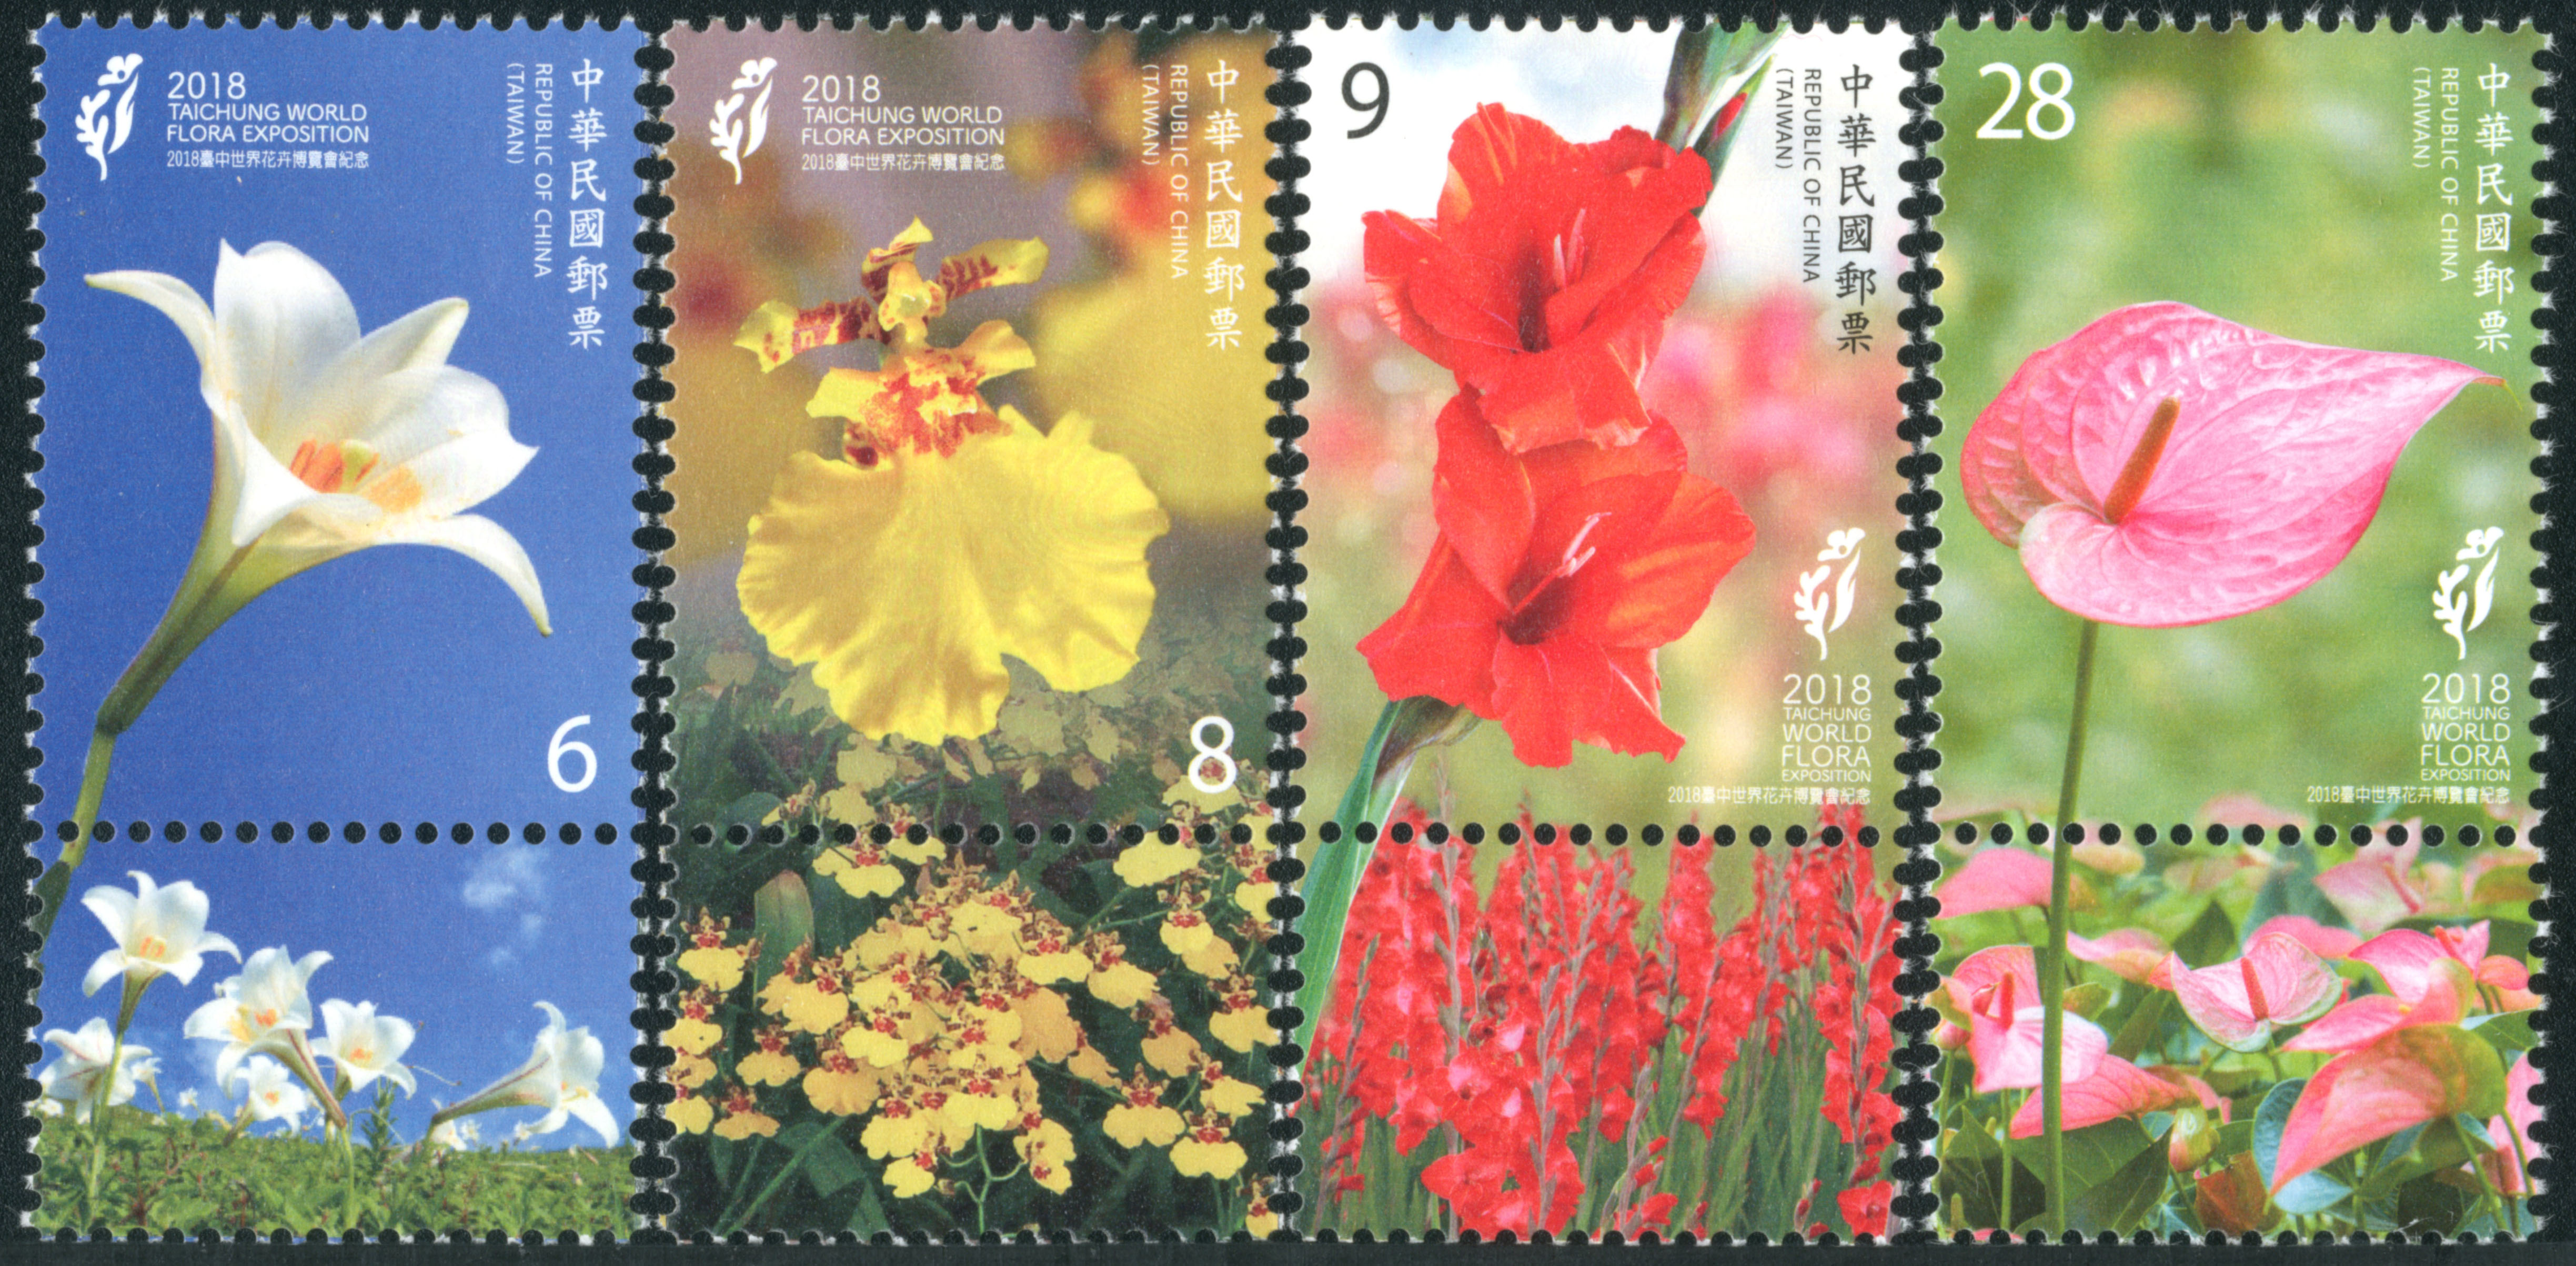 2018 Taichung World Flora Exposition Commemorative Issue